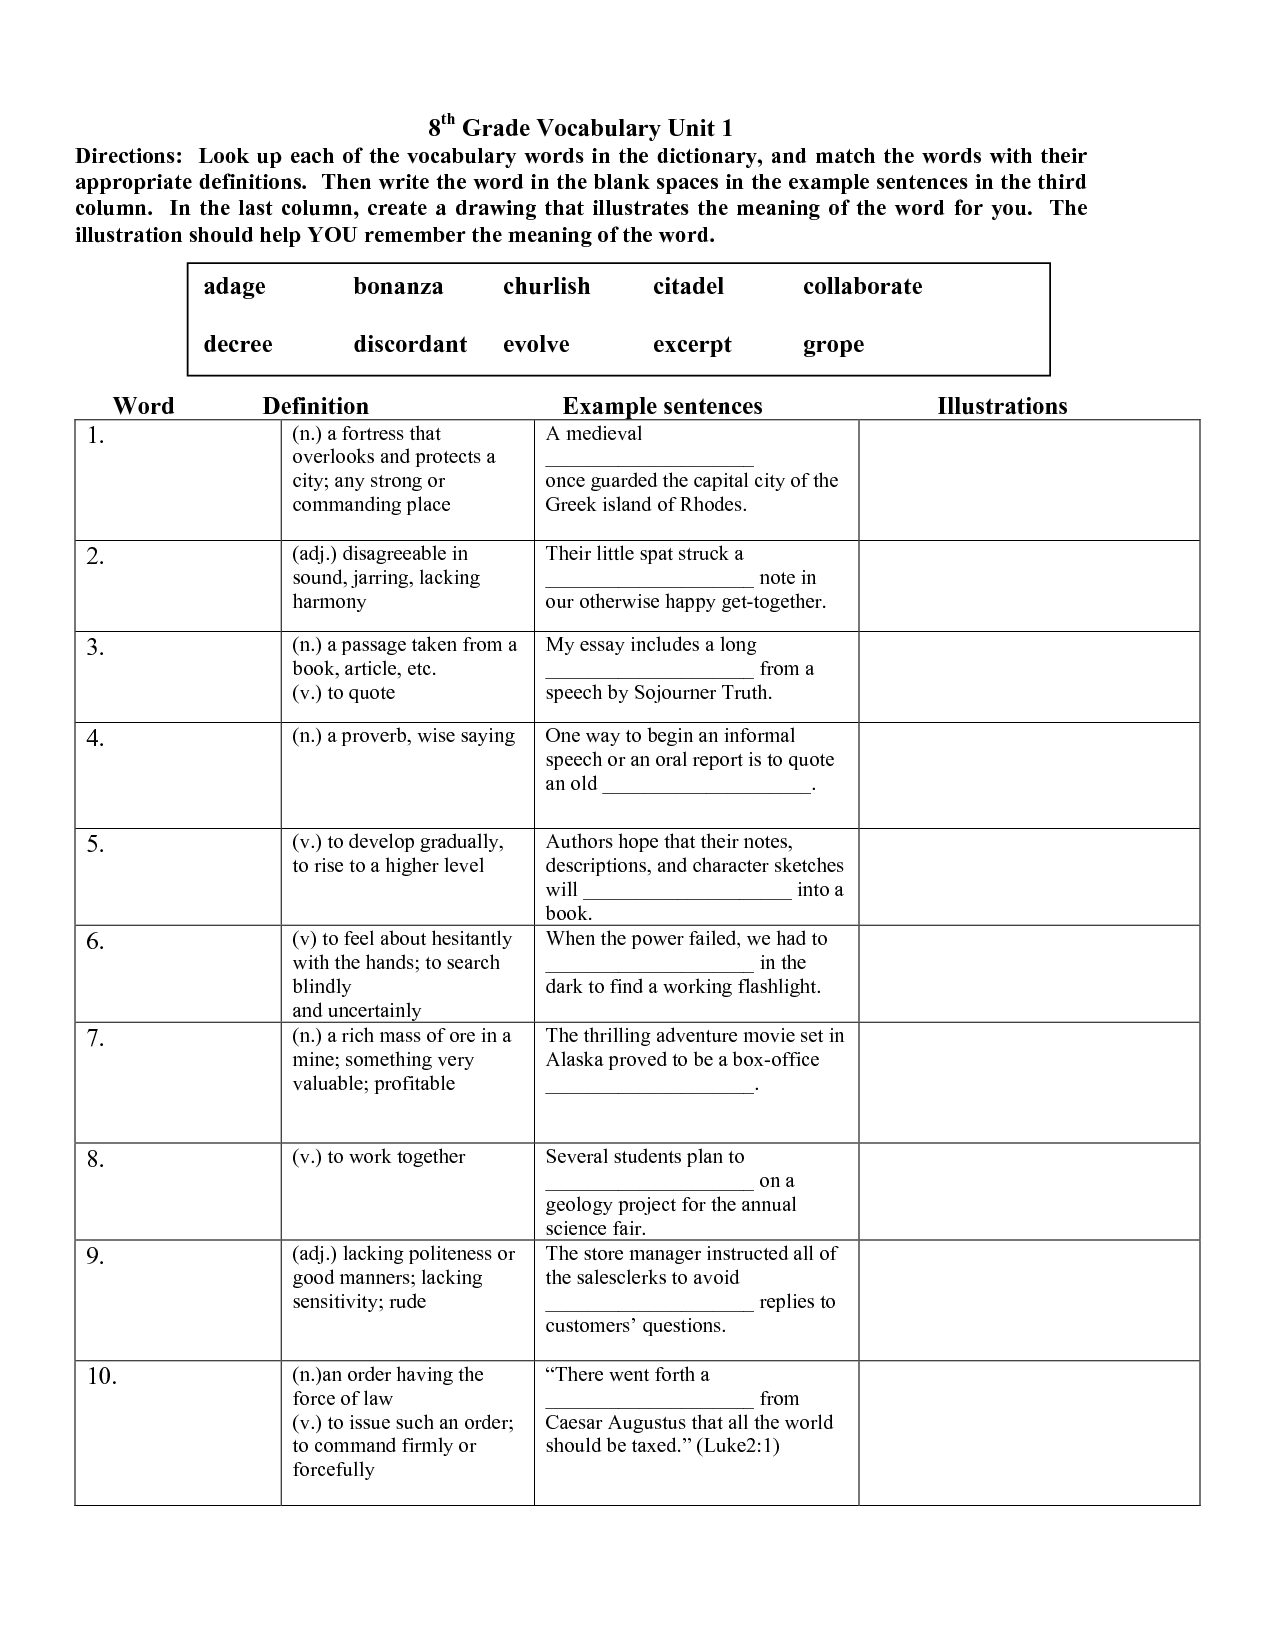 17-best-images-of-5th-grade-vocabulary-worksheets-9th-grade-spelling